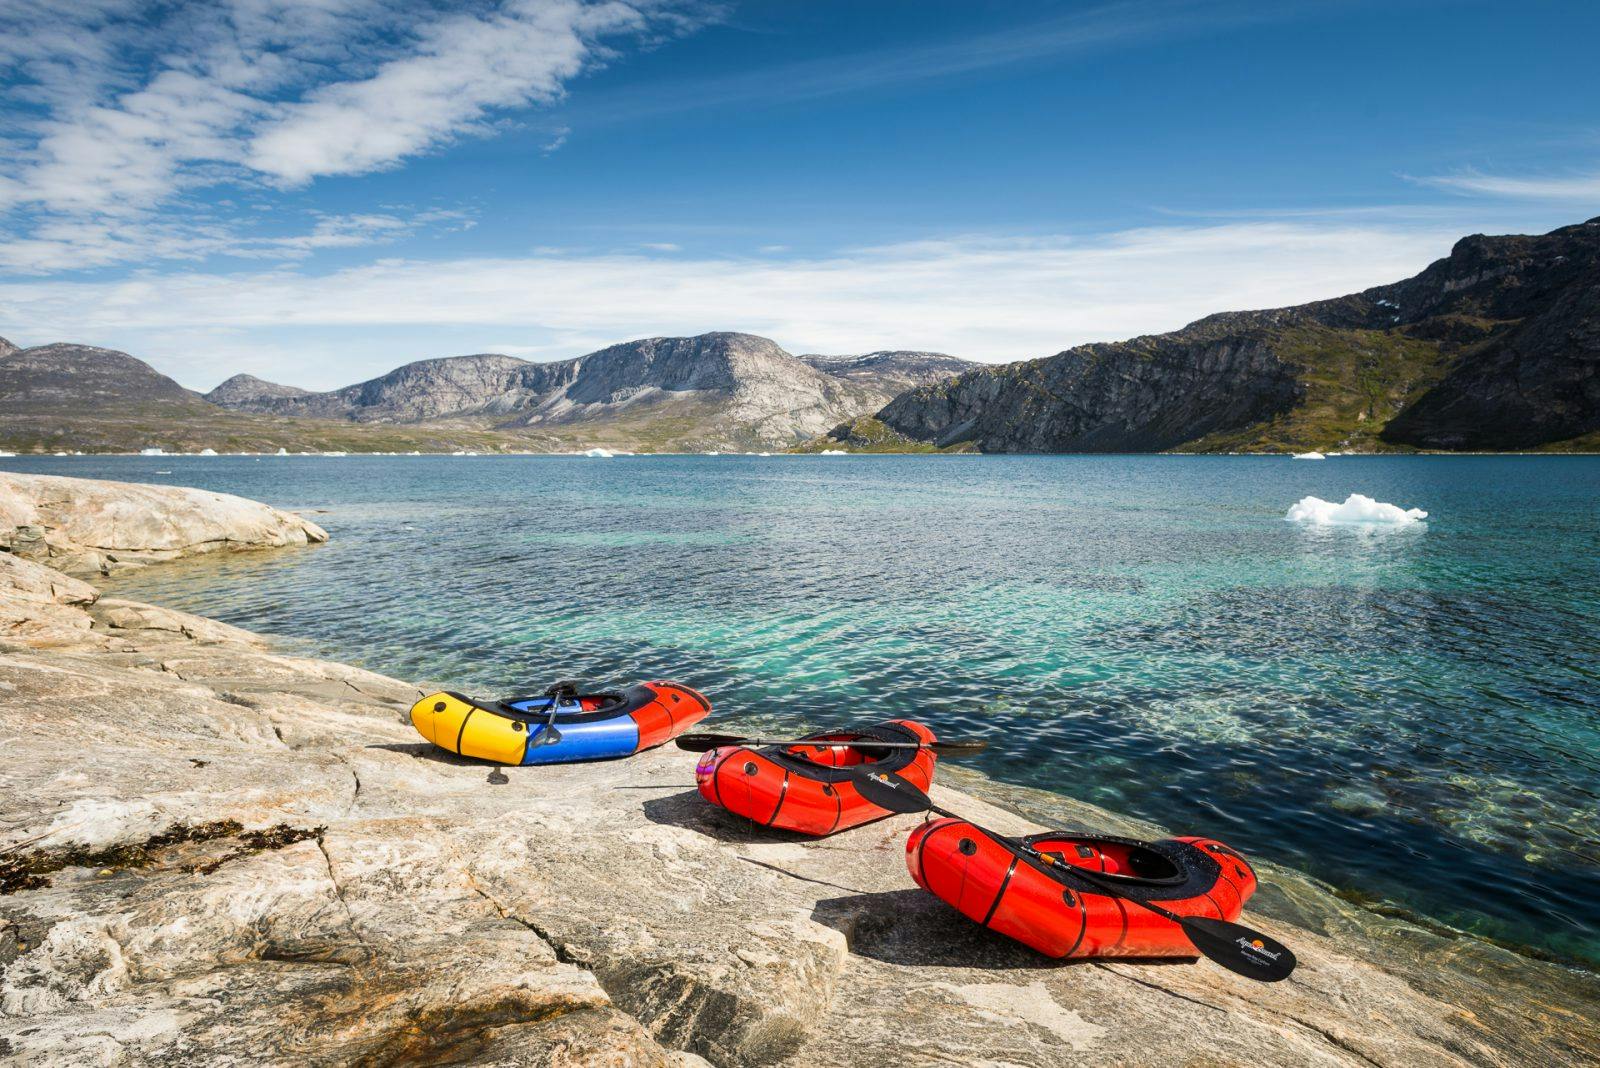 &quot;The perfect place to dry out the boats. Taken on the Nuussuaq Peninsula, western Greenland.&quot; 